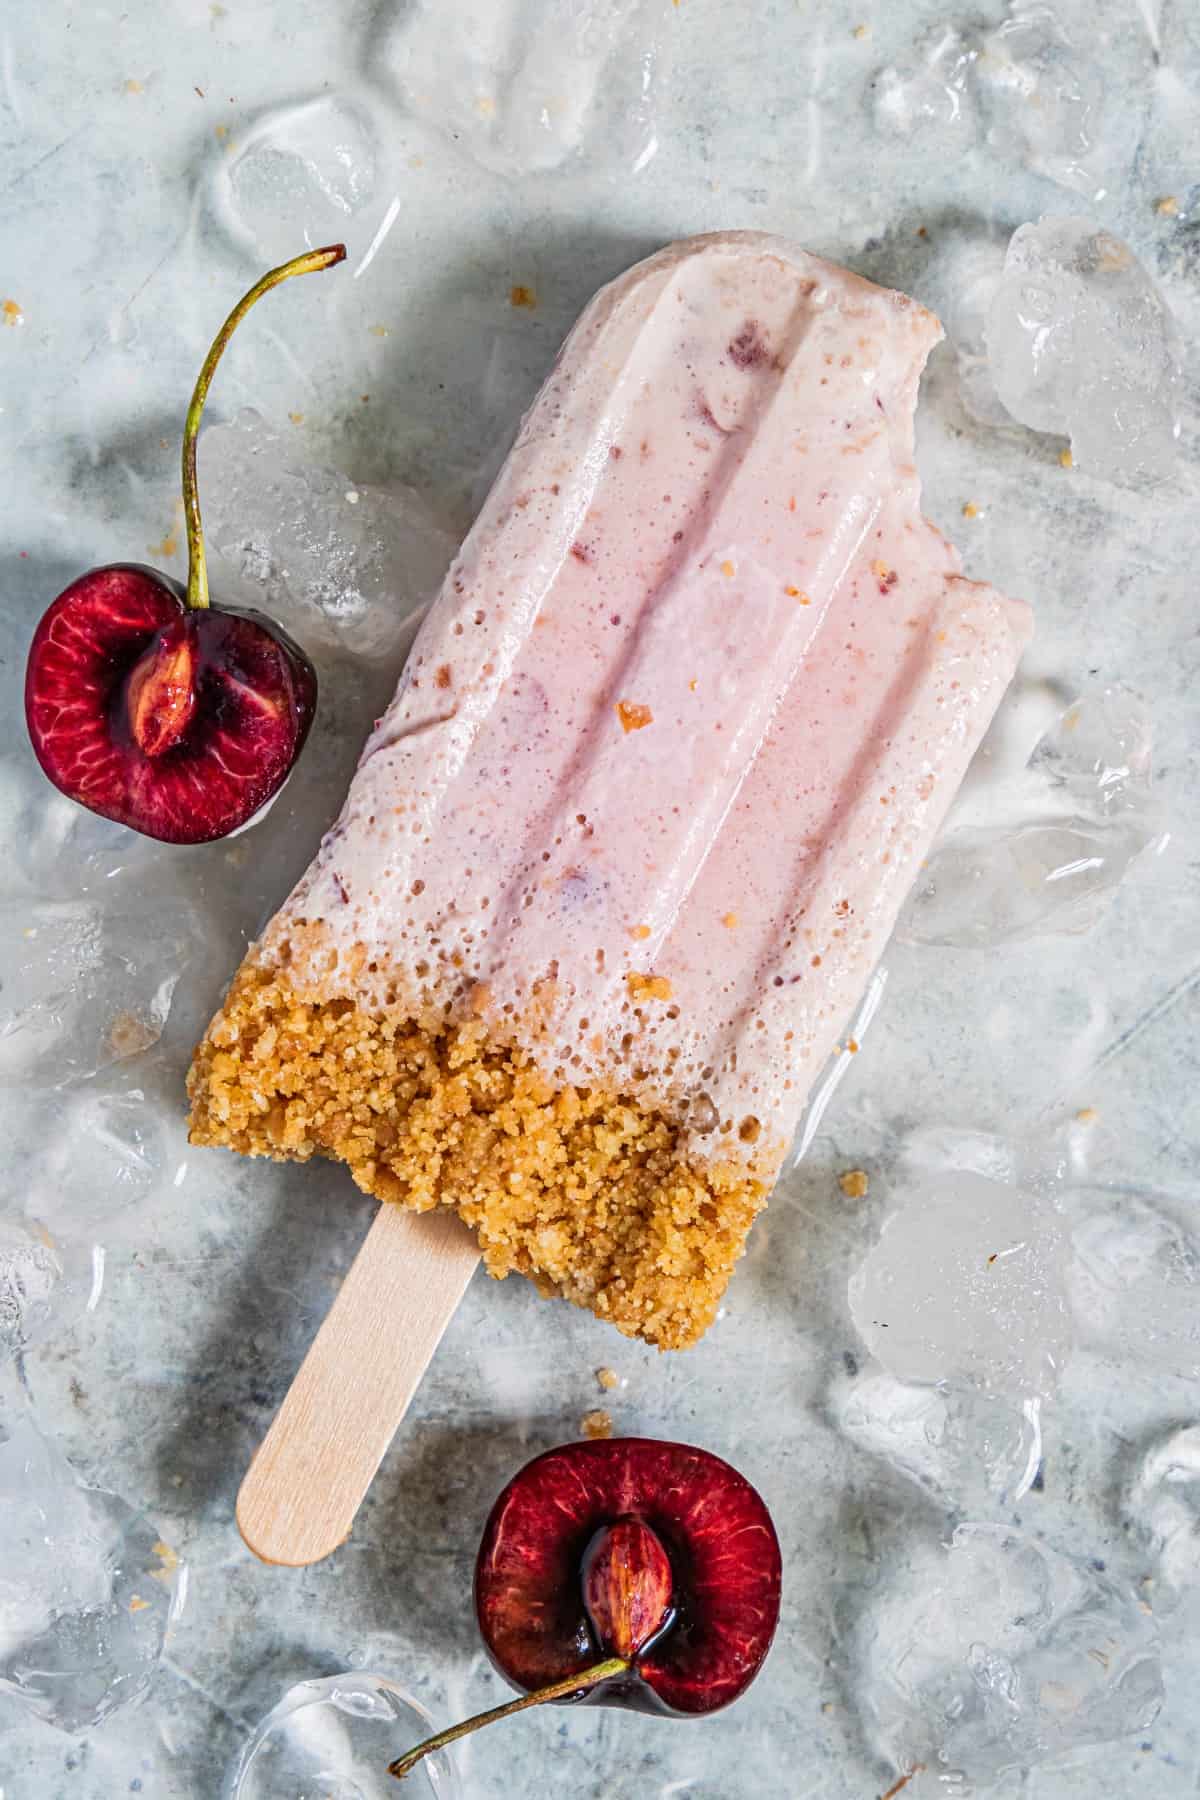 Popsicle with a bite taken